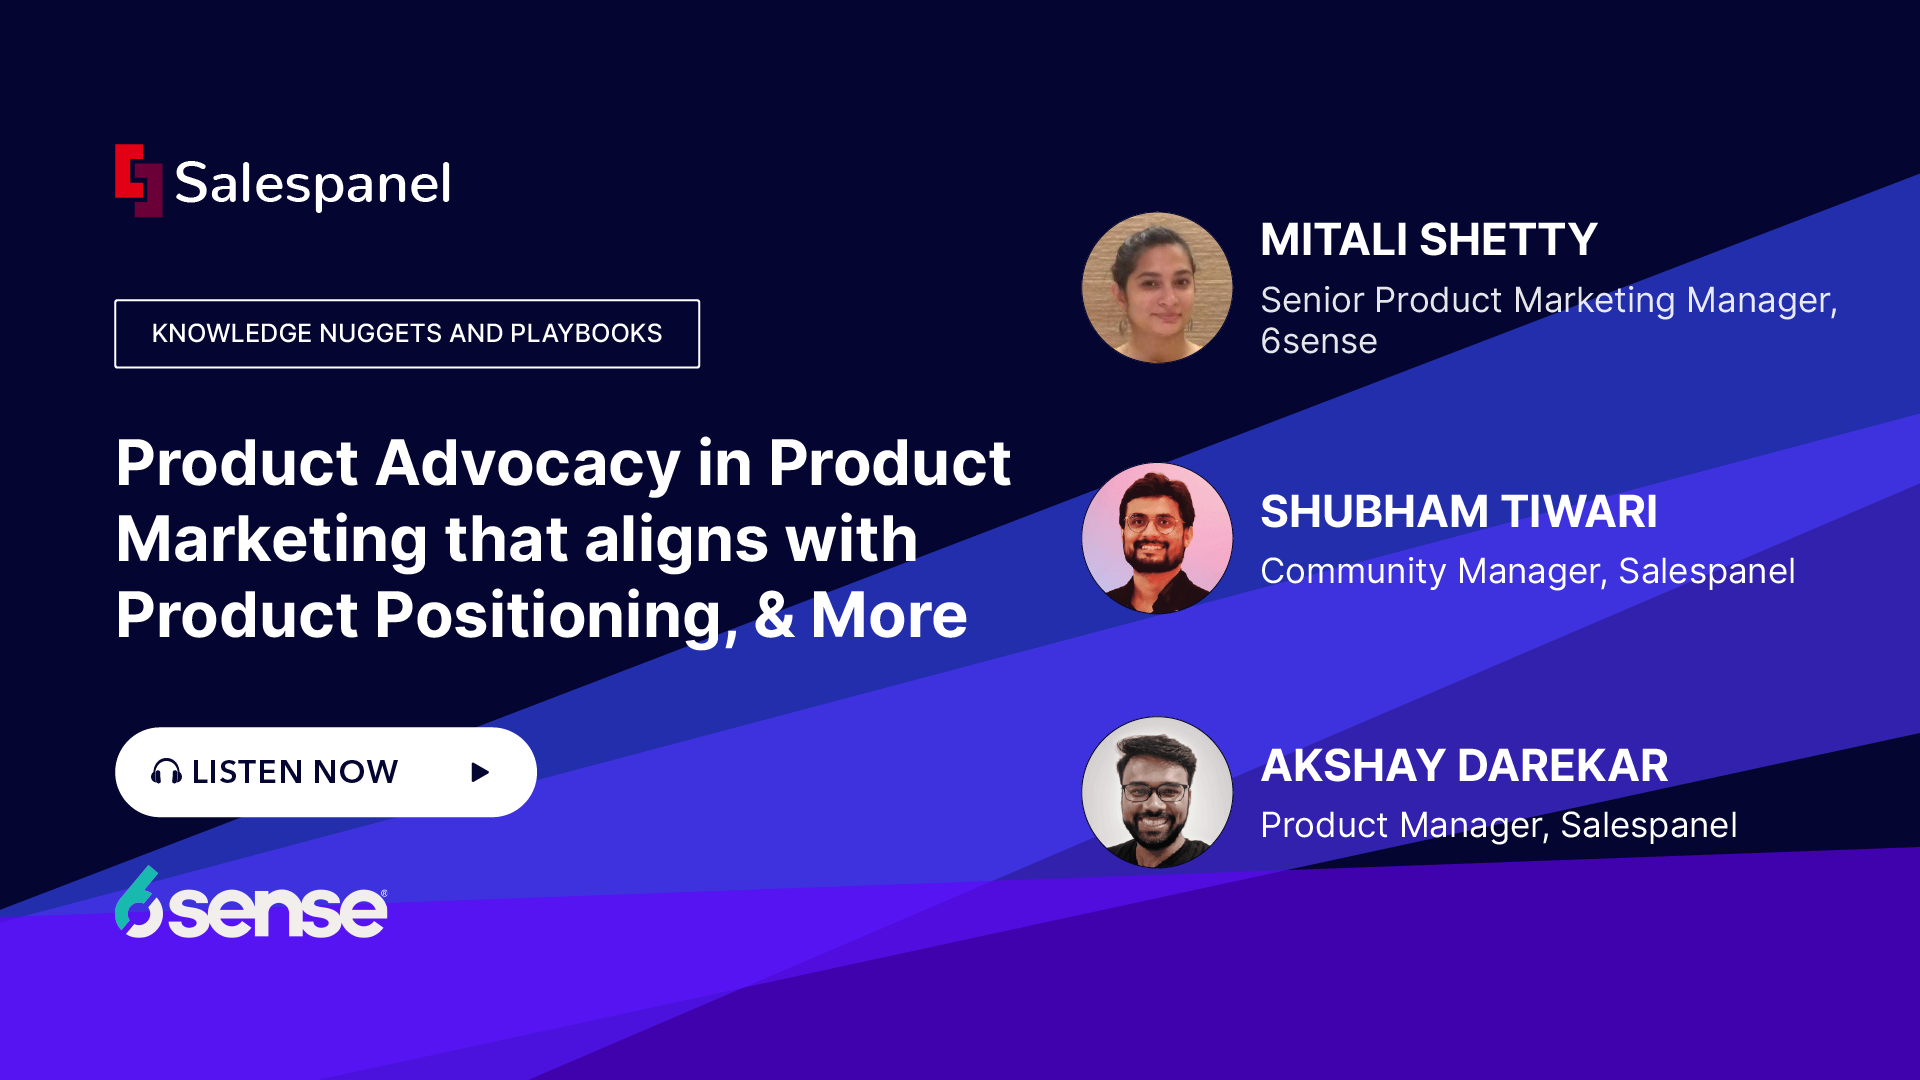 Product Advocacy in Product Marketing that aligns with Product Positioning, & More